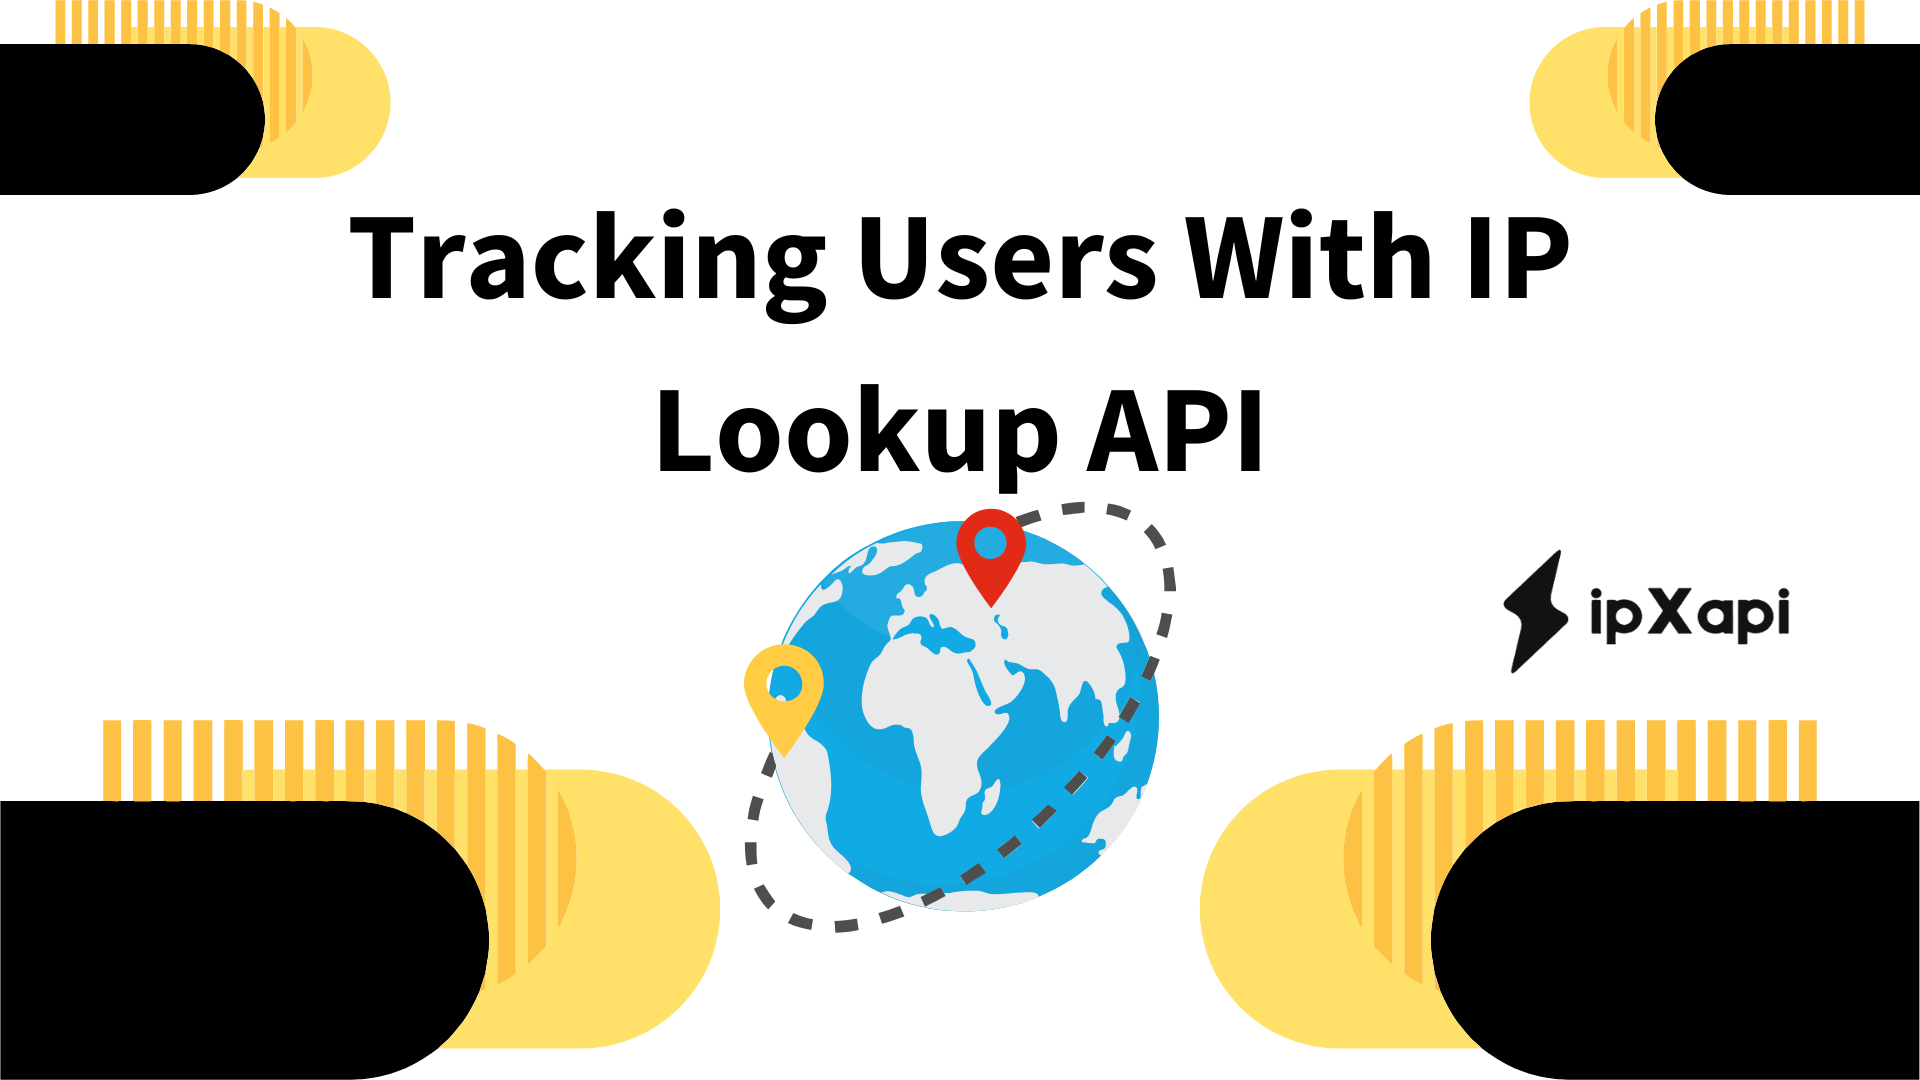 Tracking Users With IP Lookup API